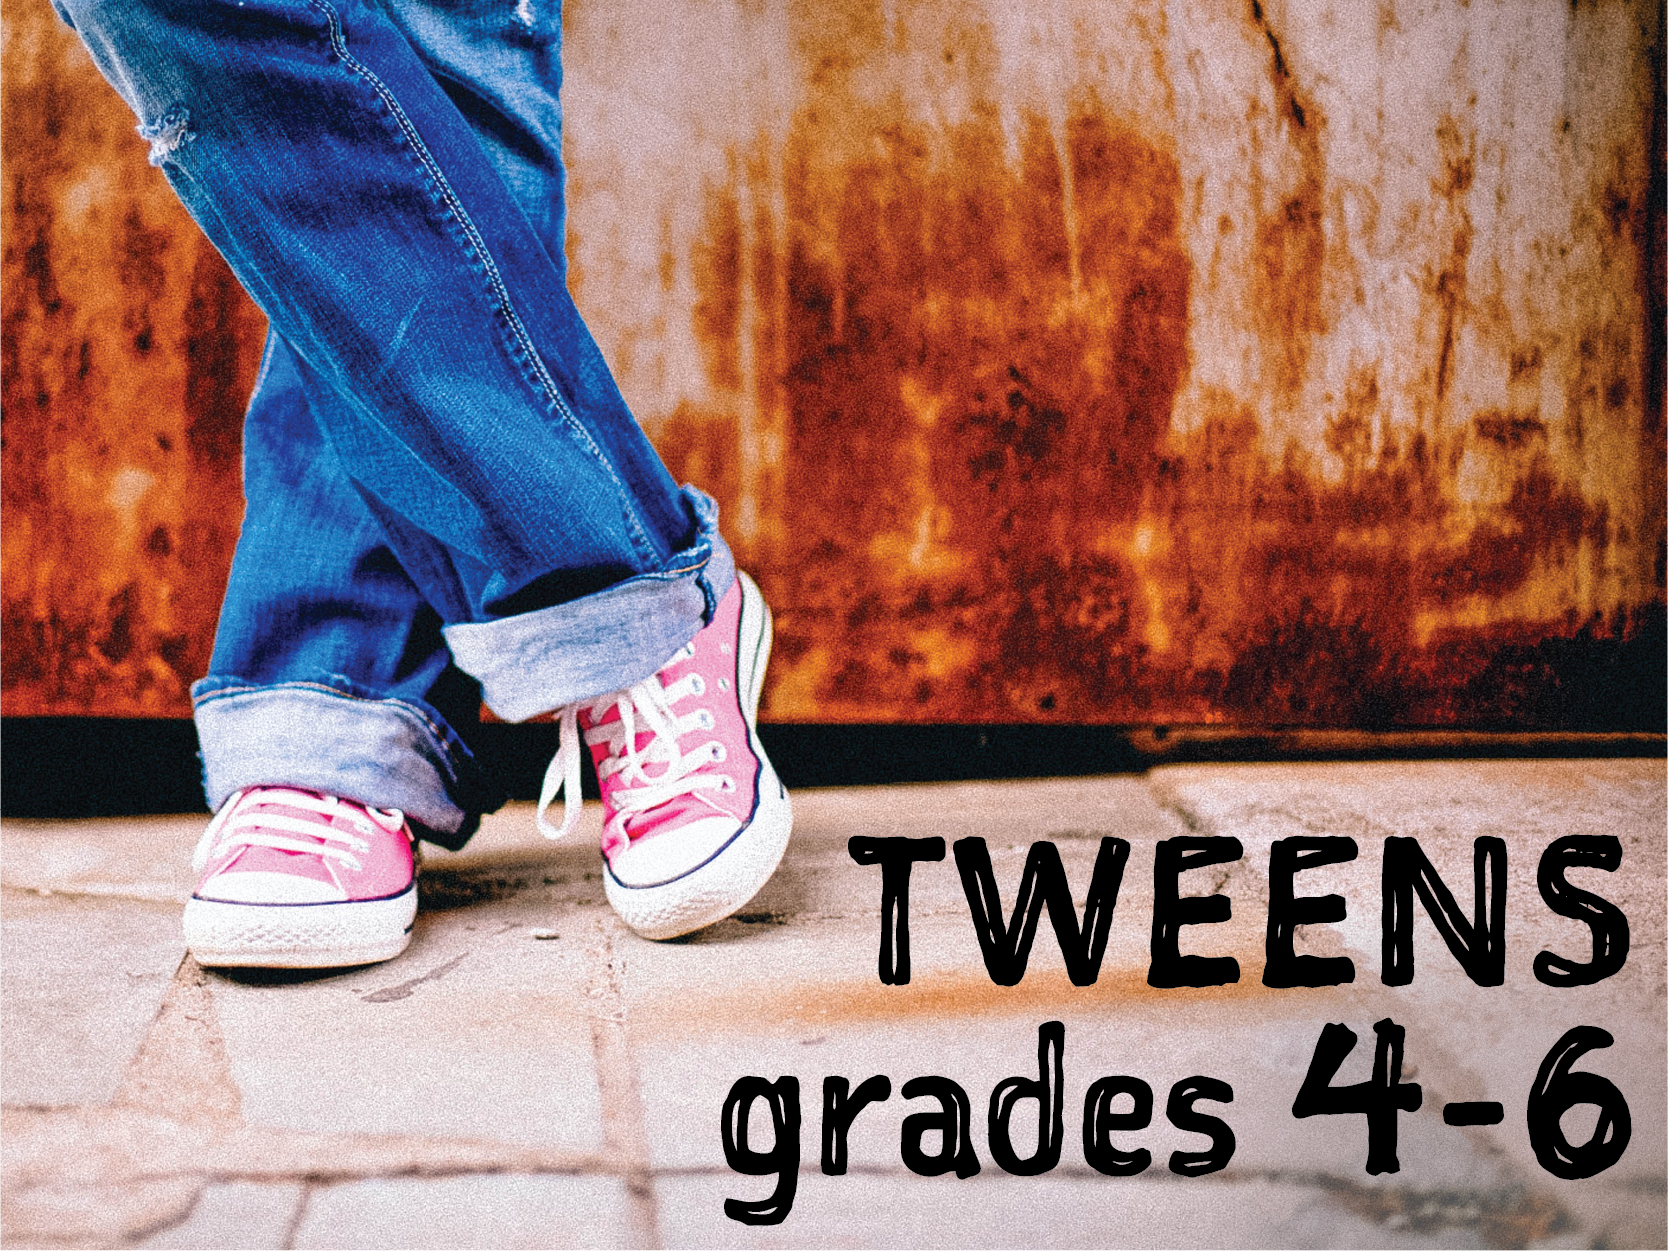 Tweens grades 4-6. Photo of legs in blue jeans with pink Converse sneakers